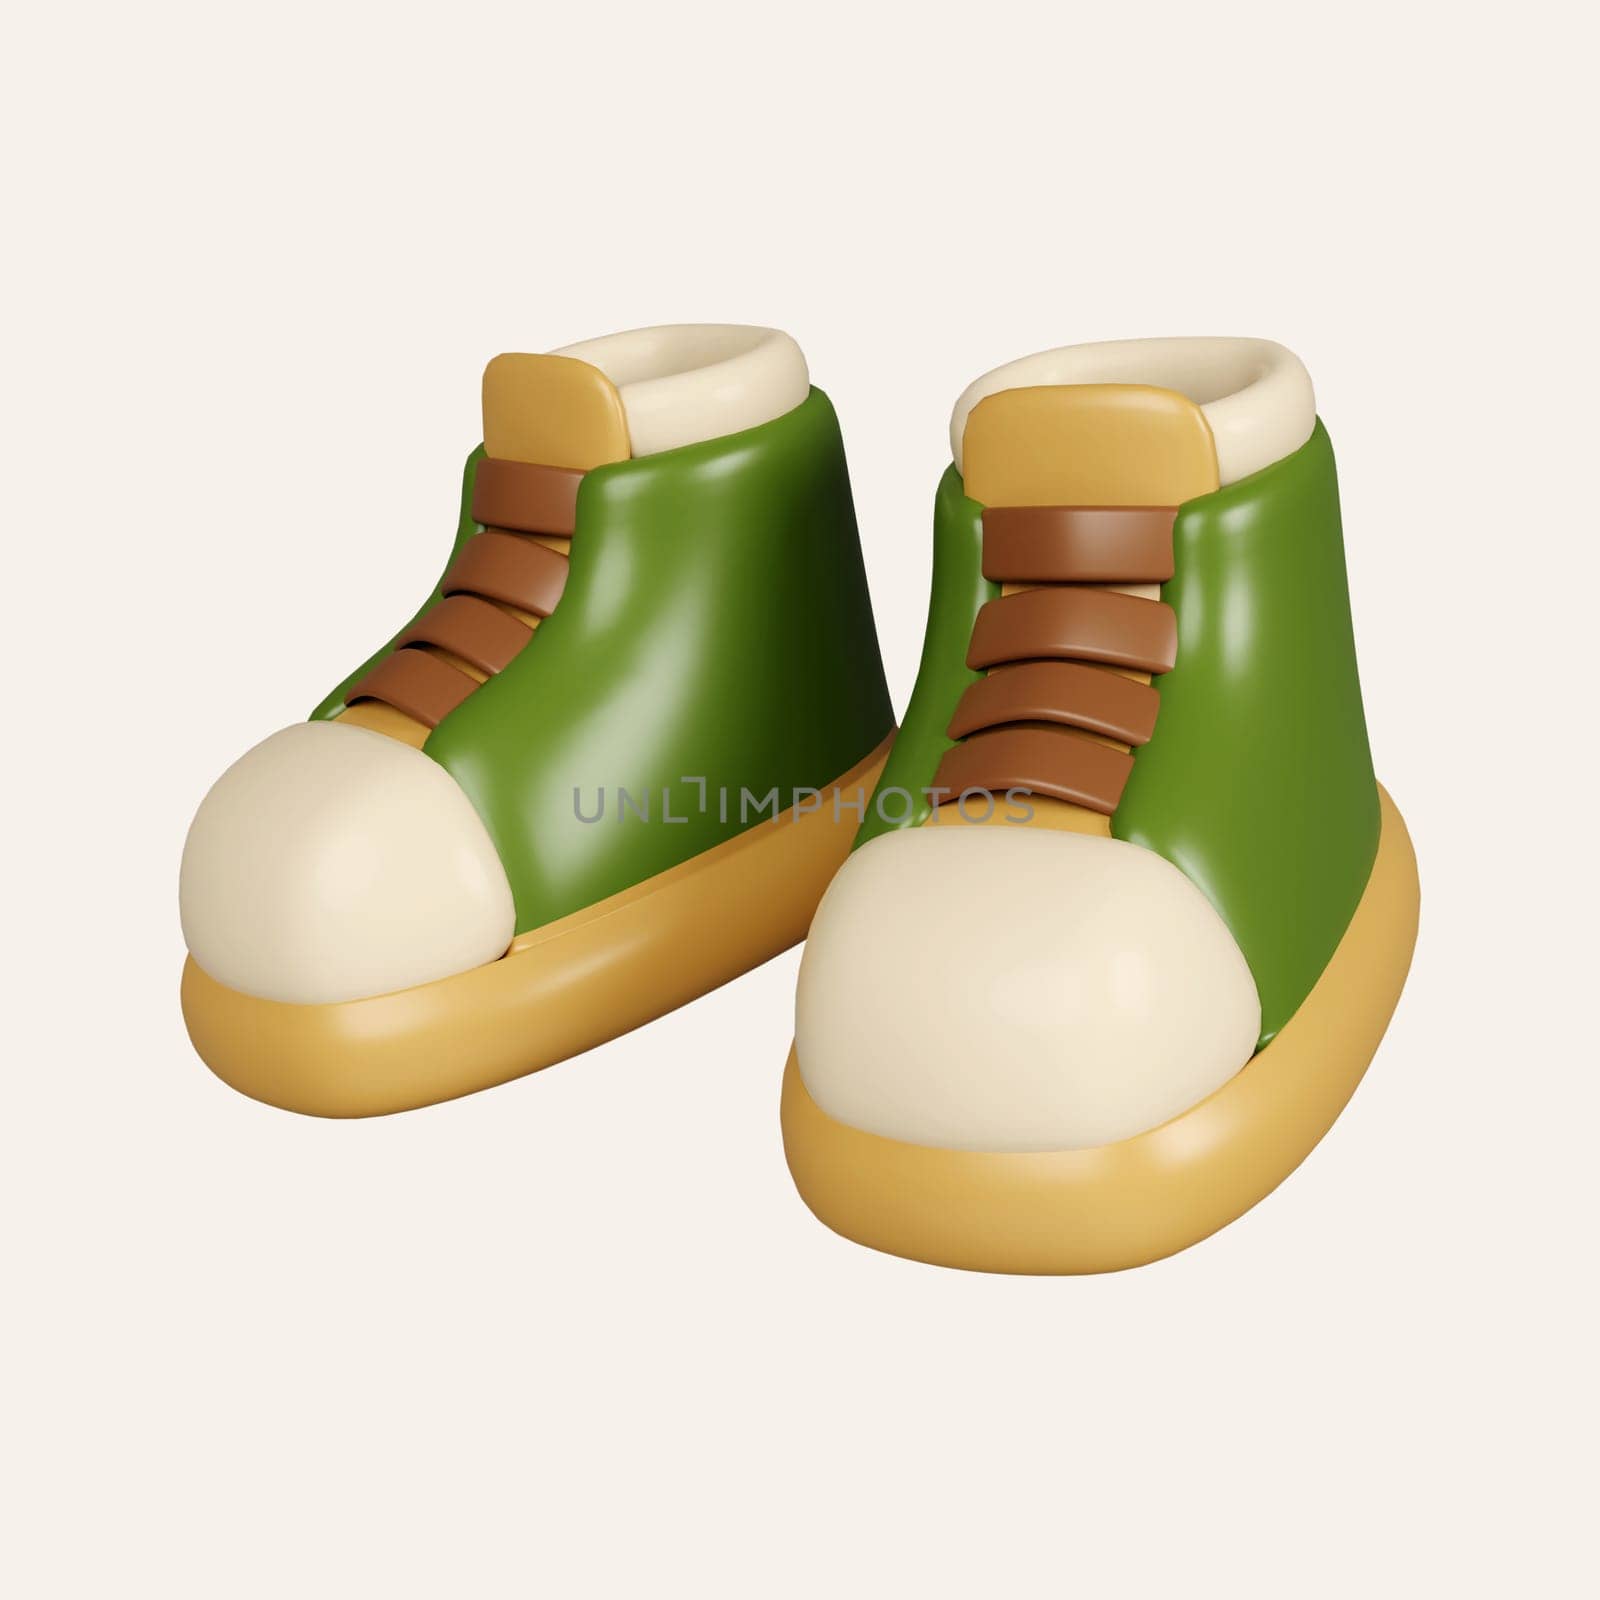 3d Hiking boots. Camping and hiking equipment. Summer camp and holiday vacation. icon isolated on white background. 3d rendering illustration. Clipping path. by meepiangraphic